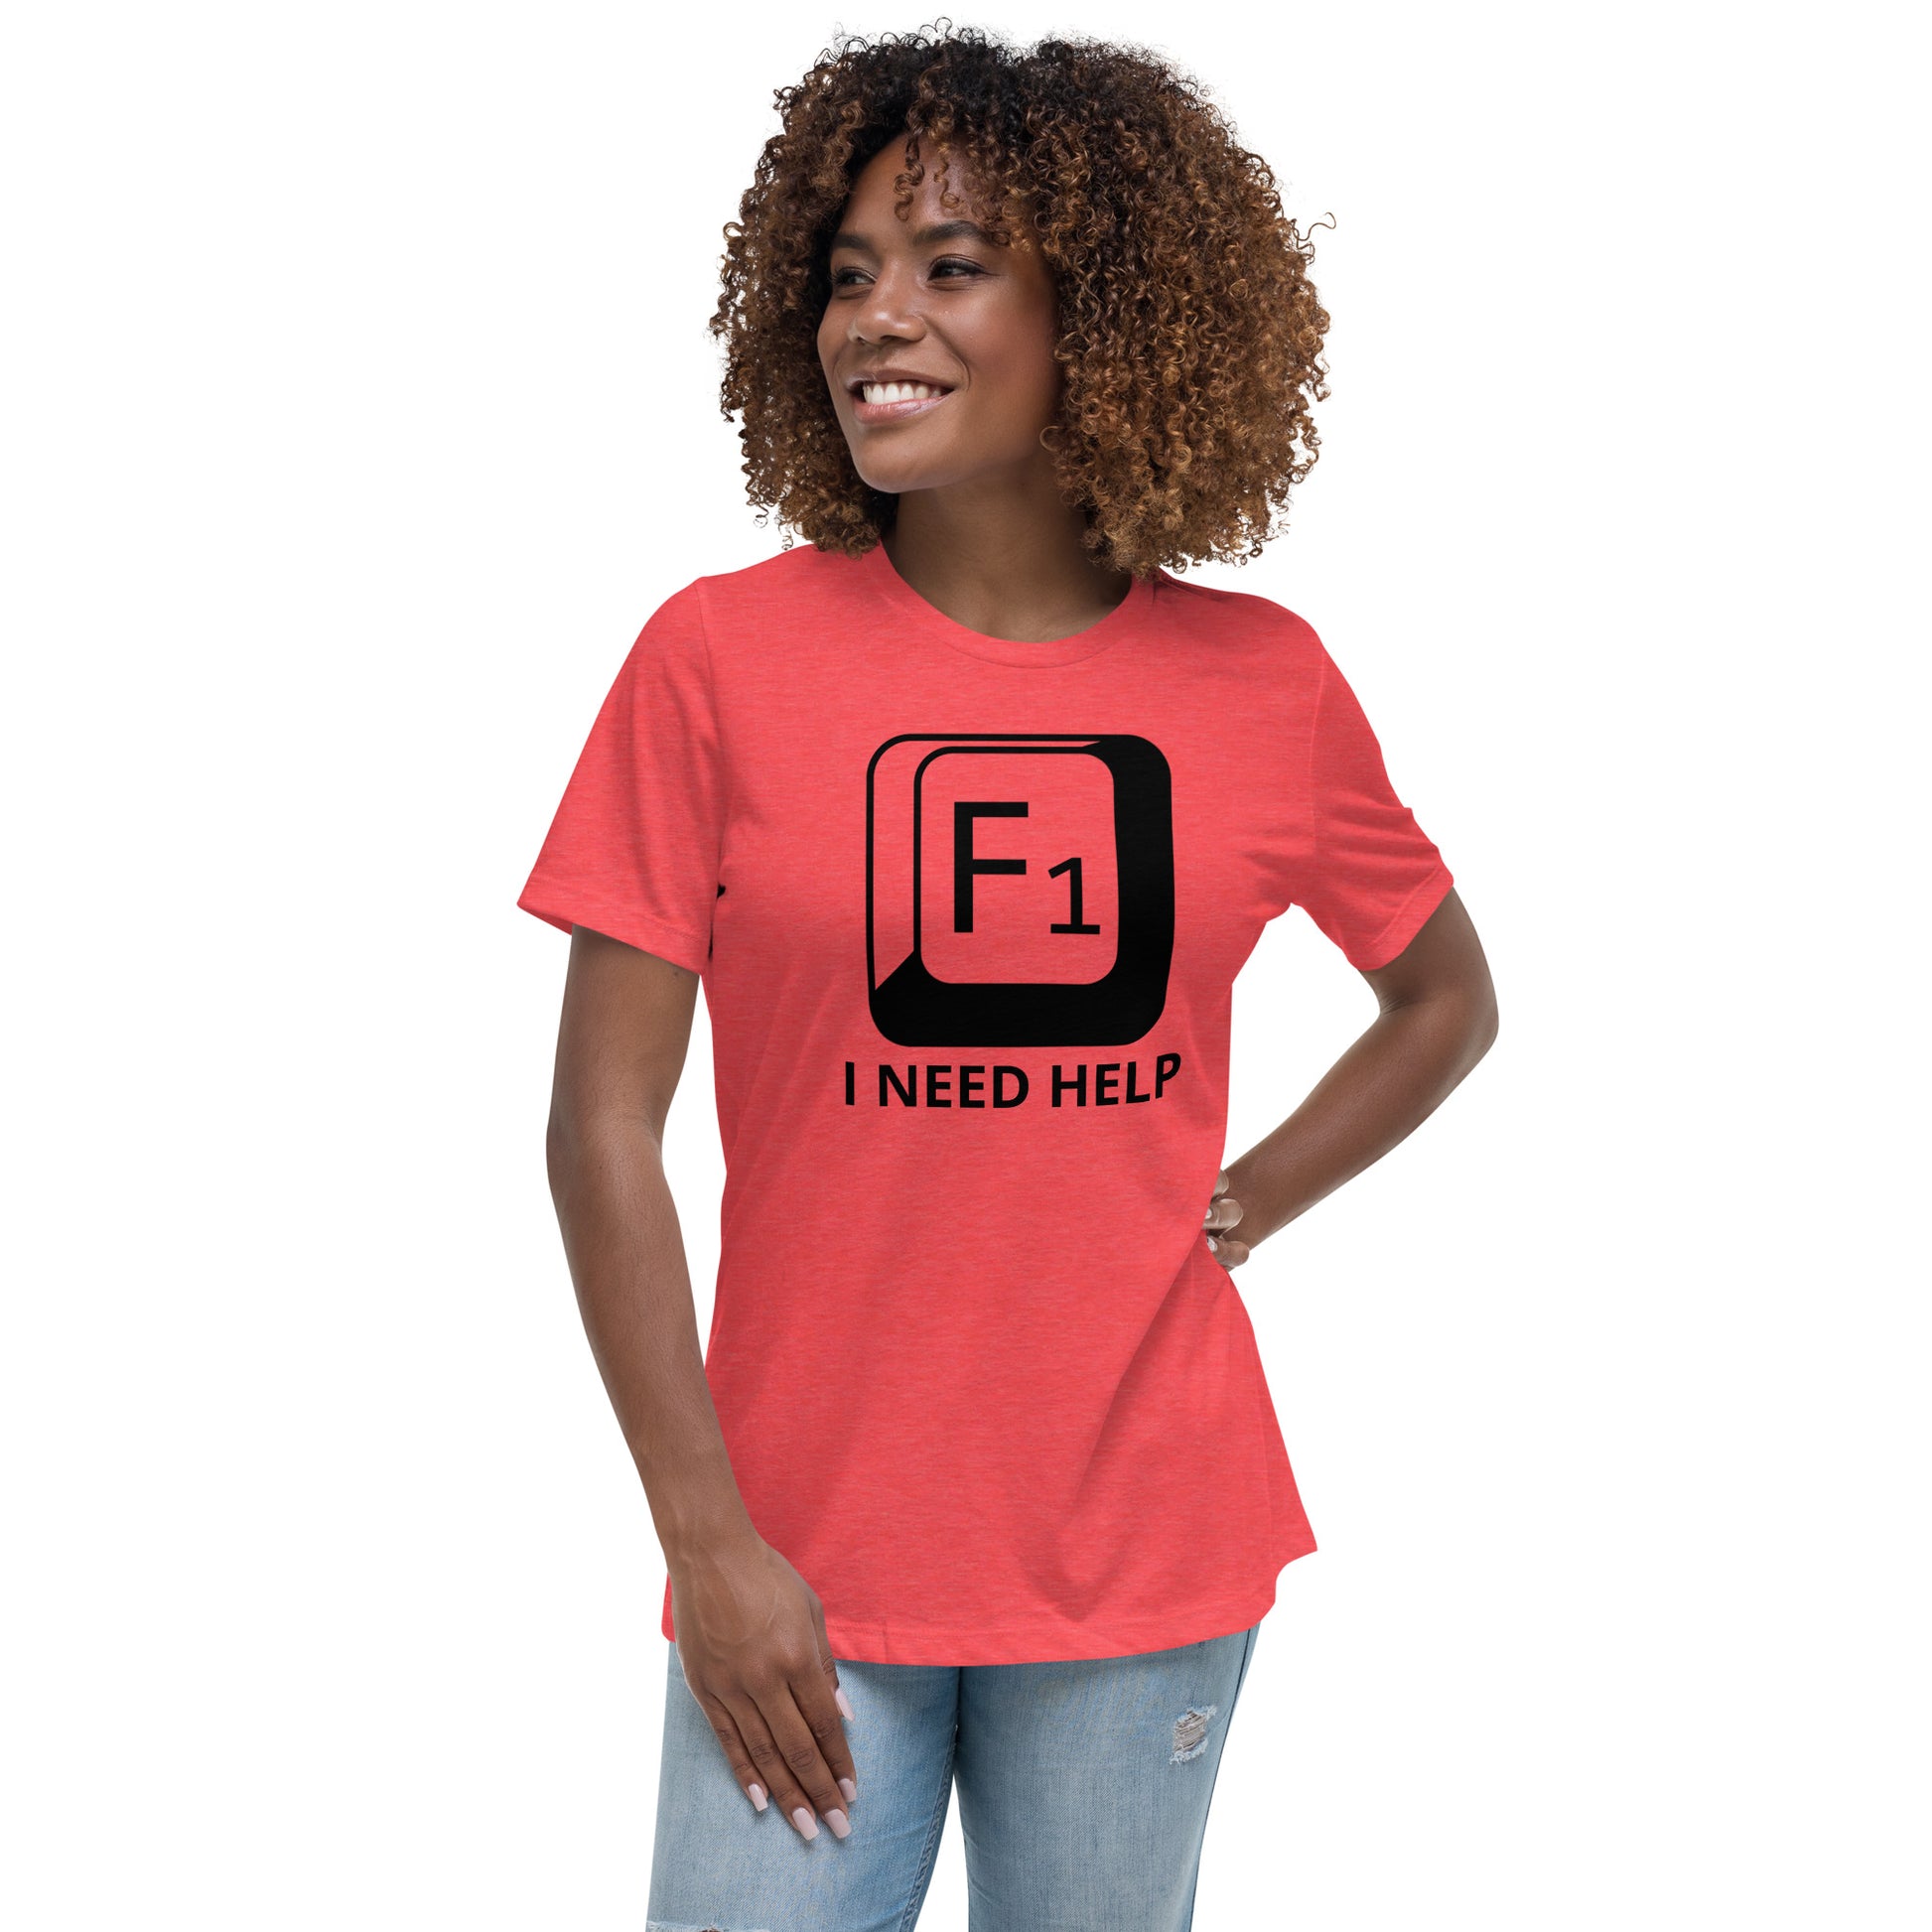 Woman with red t-shirt with picture of "F1" key and text "I need help"